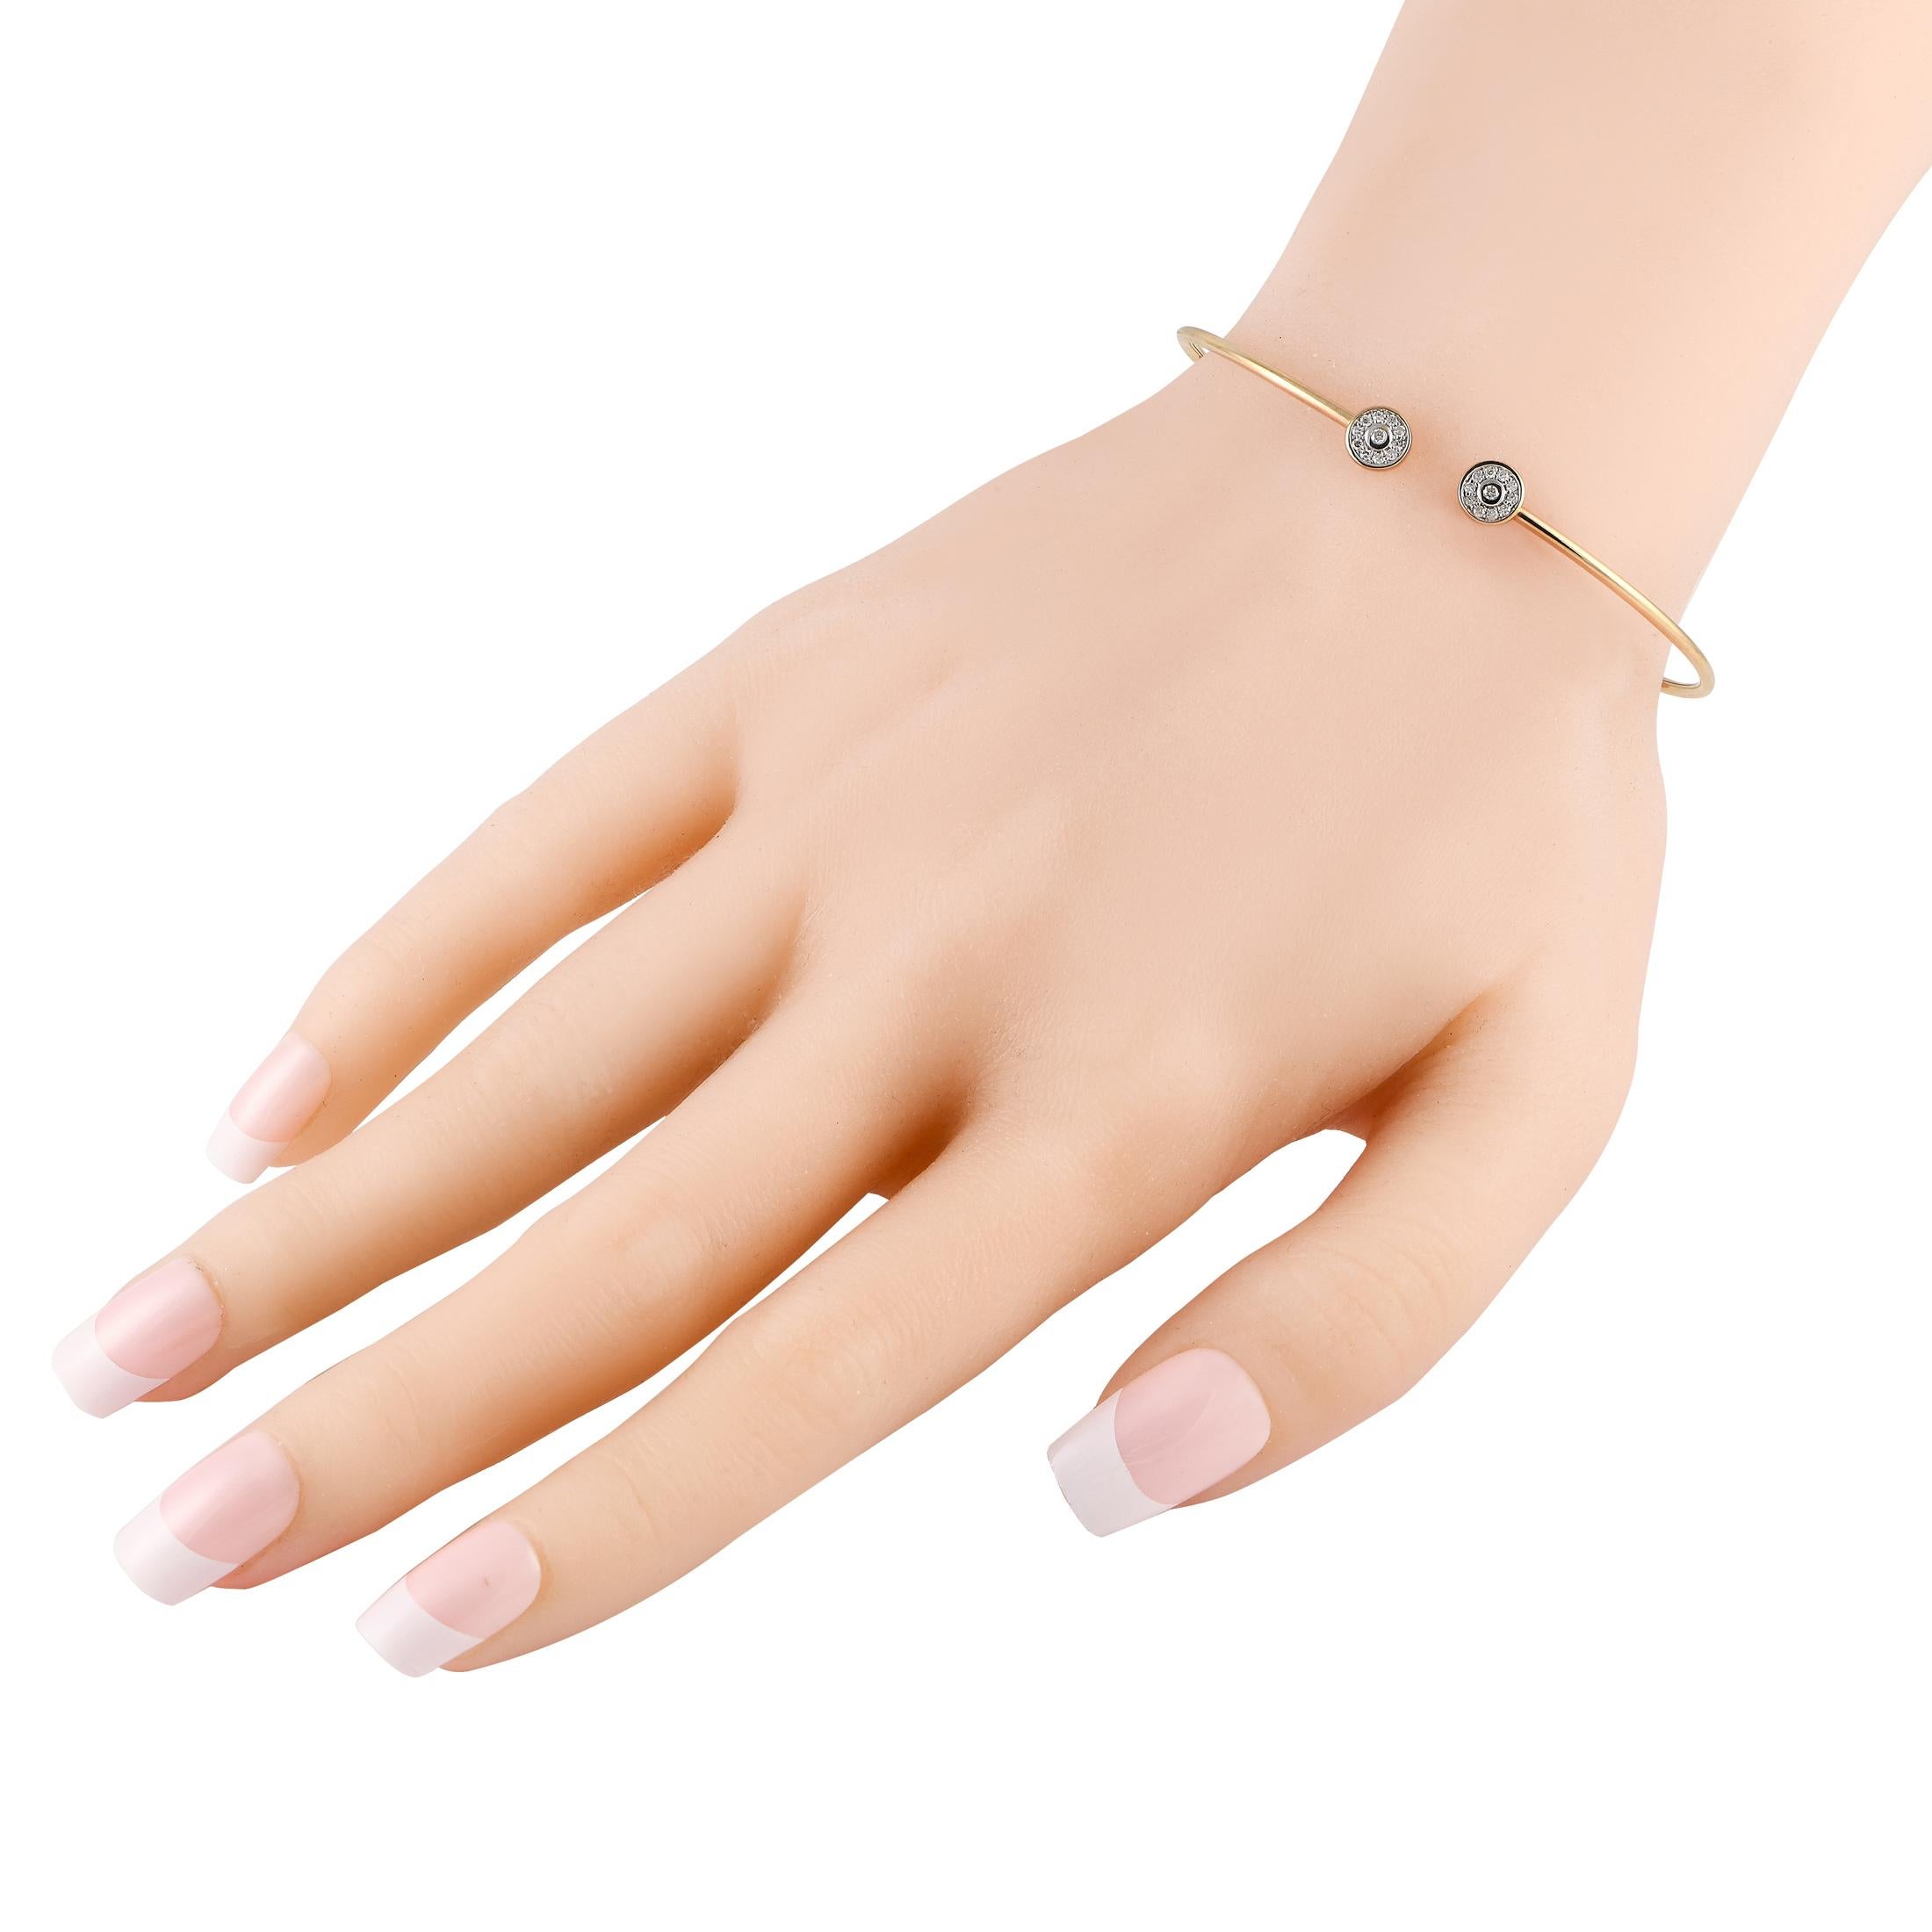 This ultra-slim cuff bangle makes the perfect embellishment for any outfit. It is crafted in durable 14K yellow gold and has its two ends punctuated by a bezel halo of tiny round diamonds. This lightweight bracelet goes with everything and has just